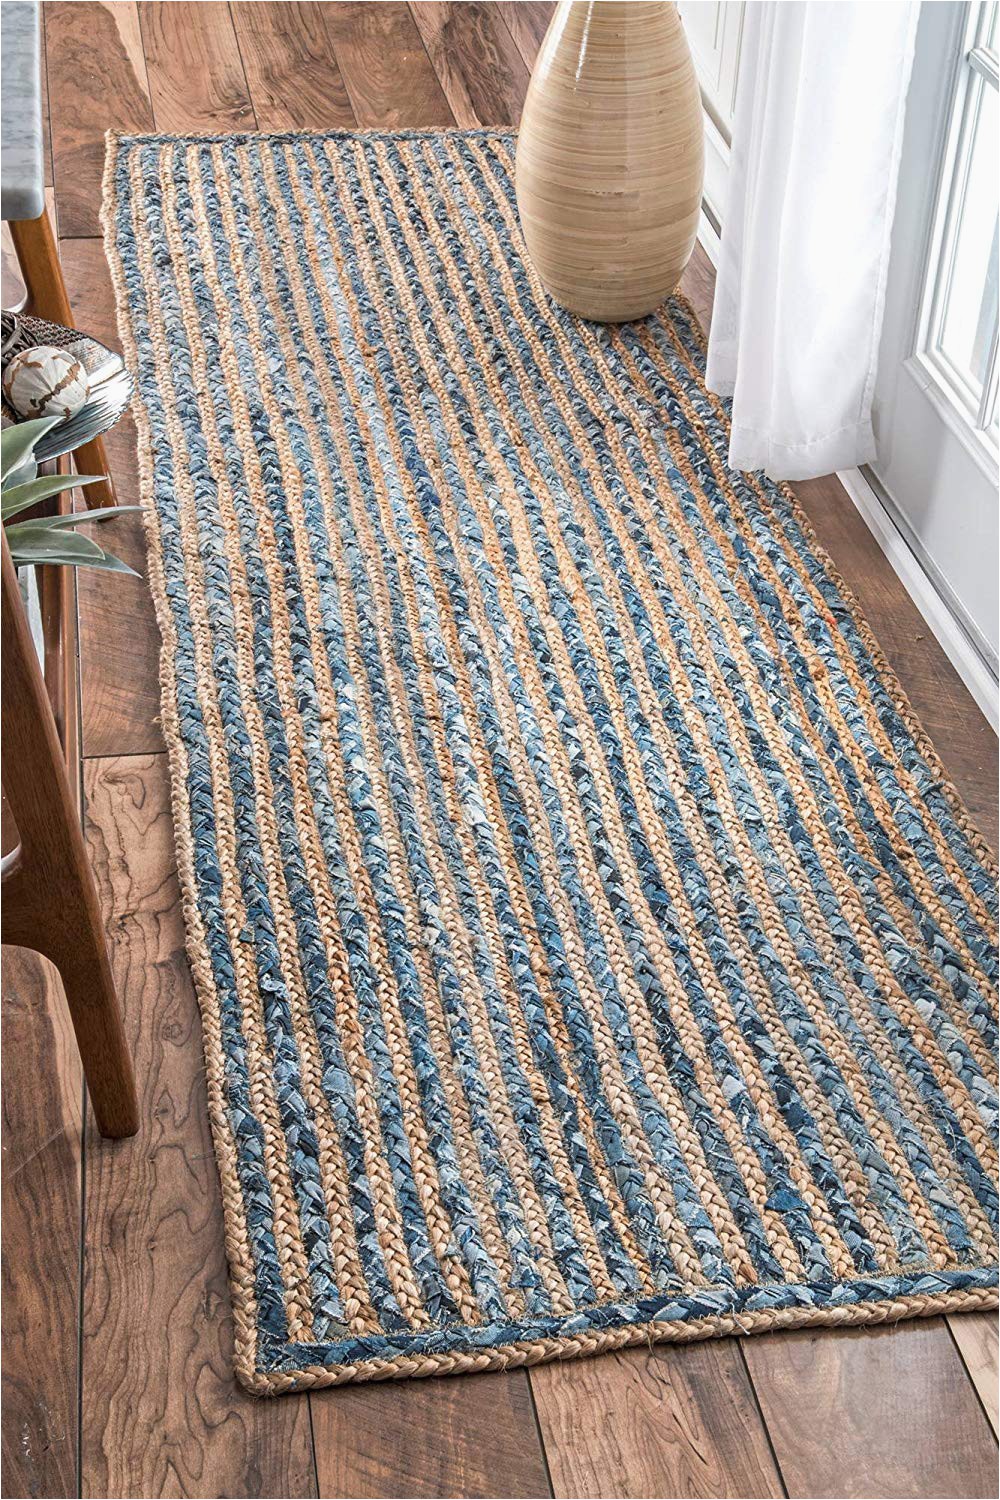 Blue Jean Rugs for Sale Denim Jeans with Jute Handmade Braided Rugs Runner for Bedside Hallway or Kitchen Avioni Premium Collection 56×140 Cm